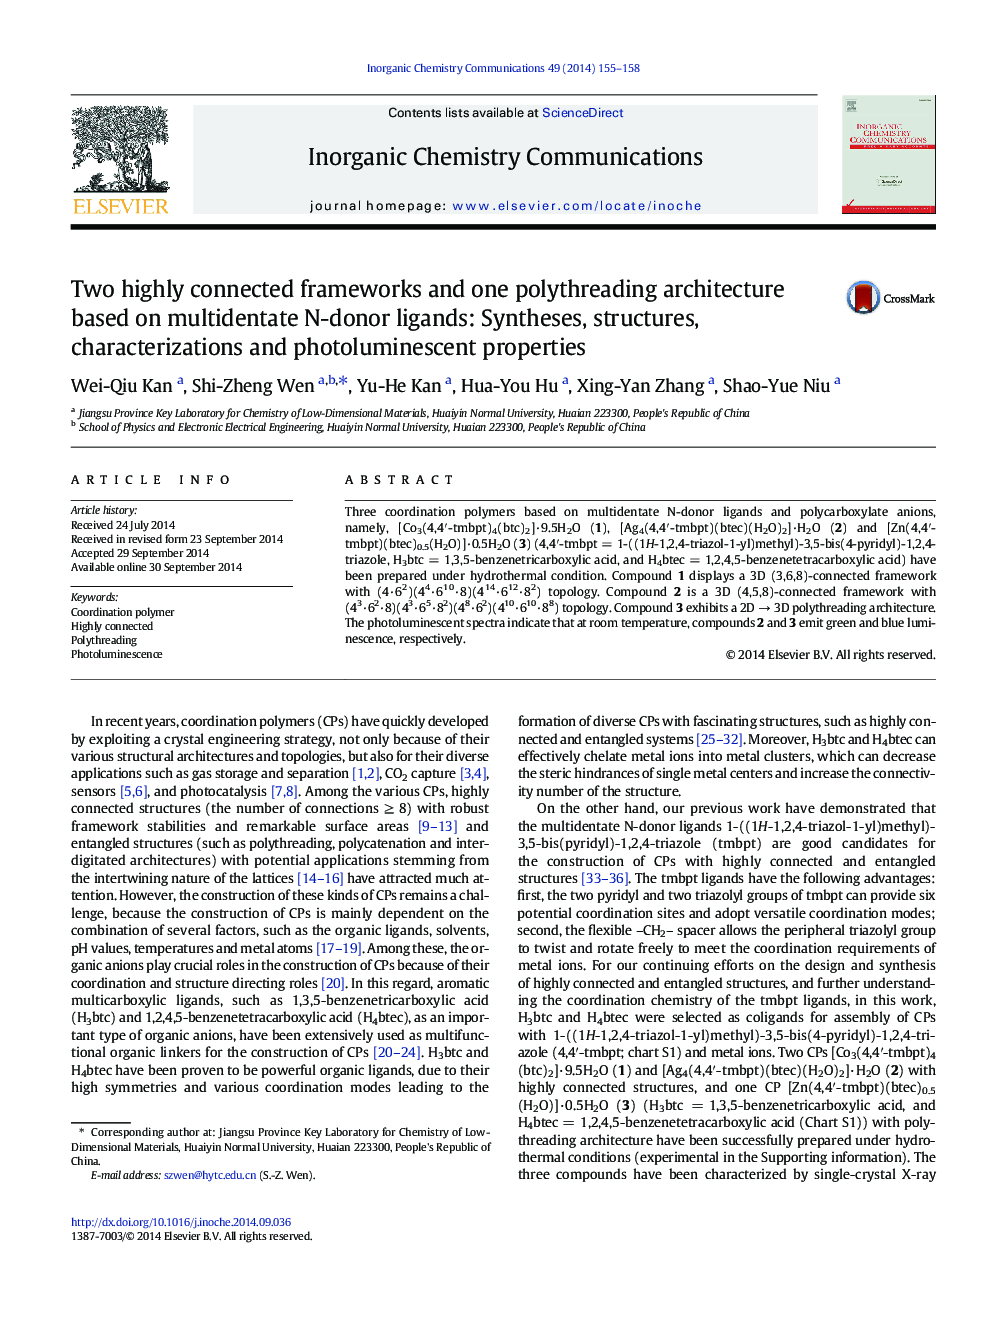 Two highly connected frameworks and one polythreading architecture based on multidentate N-donor ligands: Syntheses, structures, characterizations and photoluminescent properties